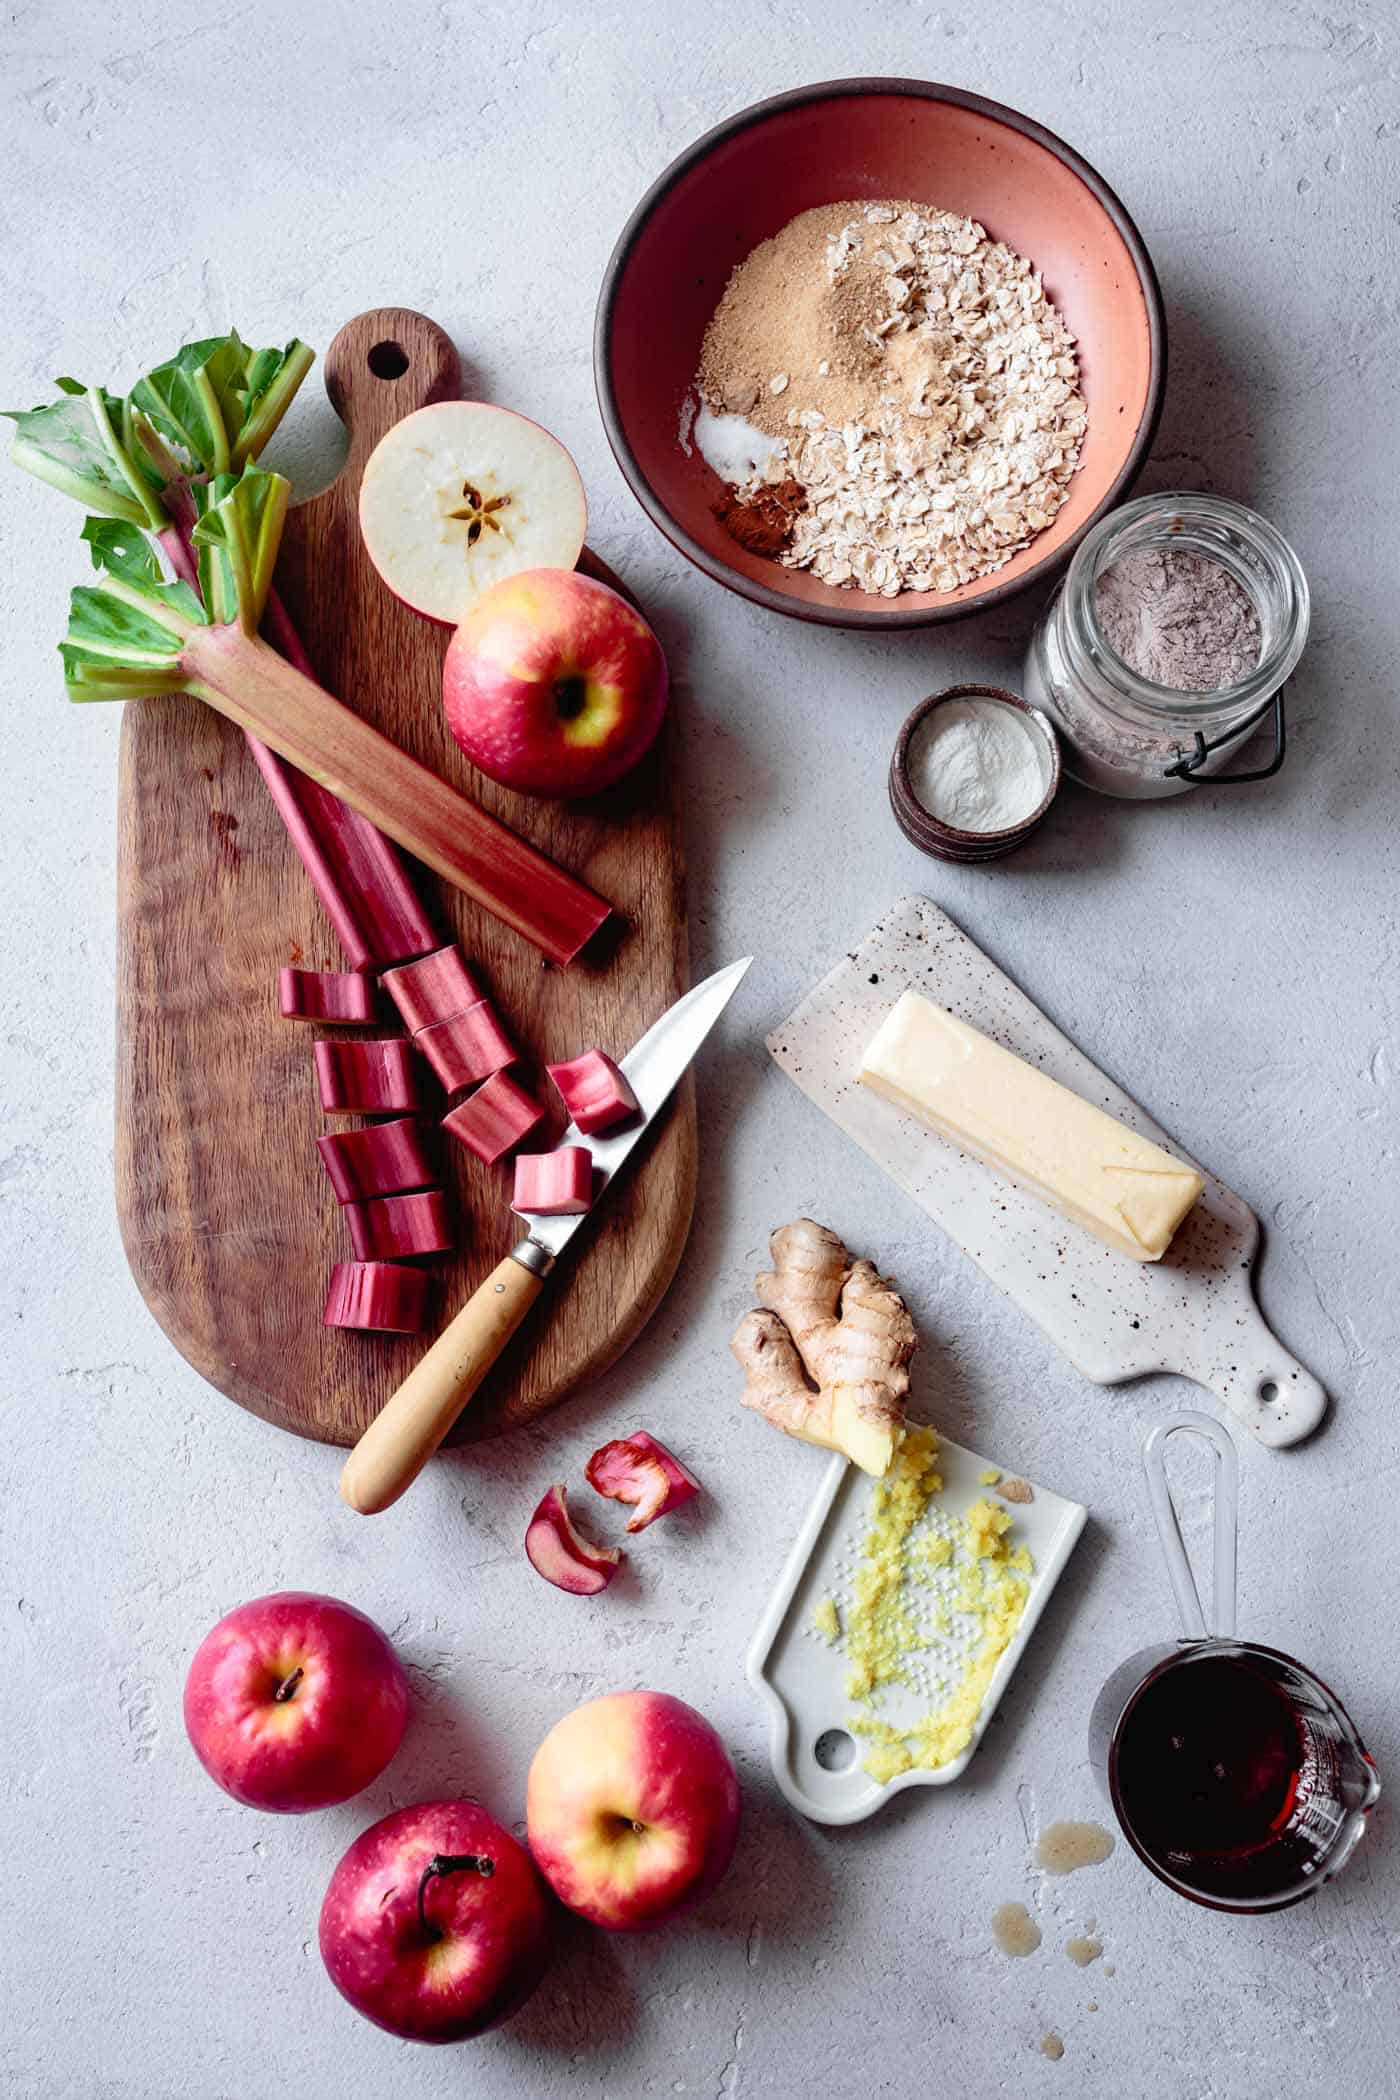 Ingredients for healthy apple rhubarb crisp with ginger and maple